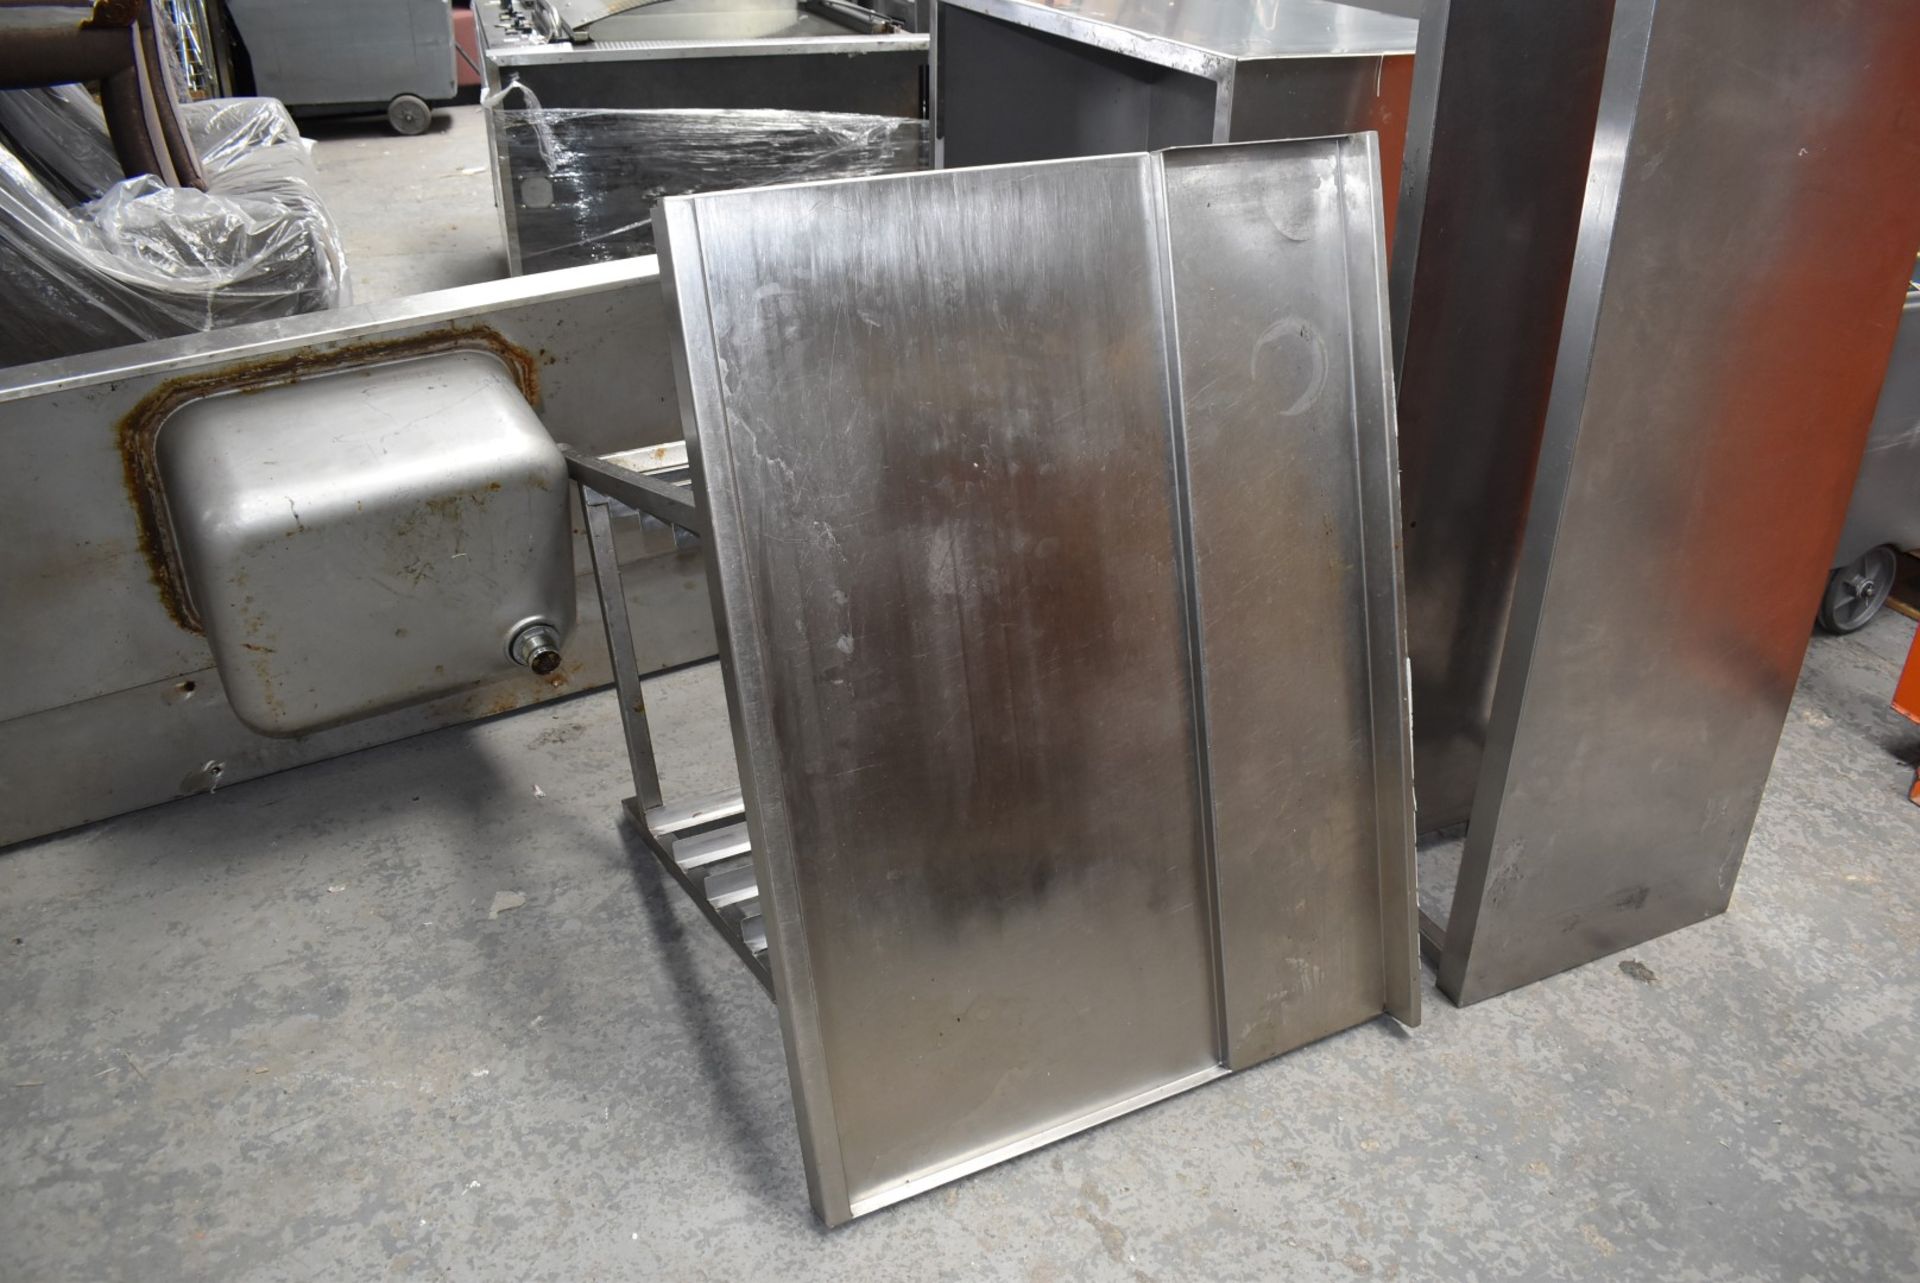 1 x Winterhalter PT-M Series Commercial Passthrough Dishwasher - 2022 Model - Approx RRP £20,000 - Image 15 of 20